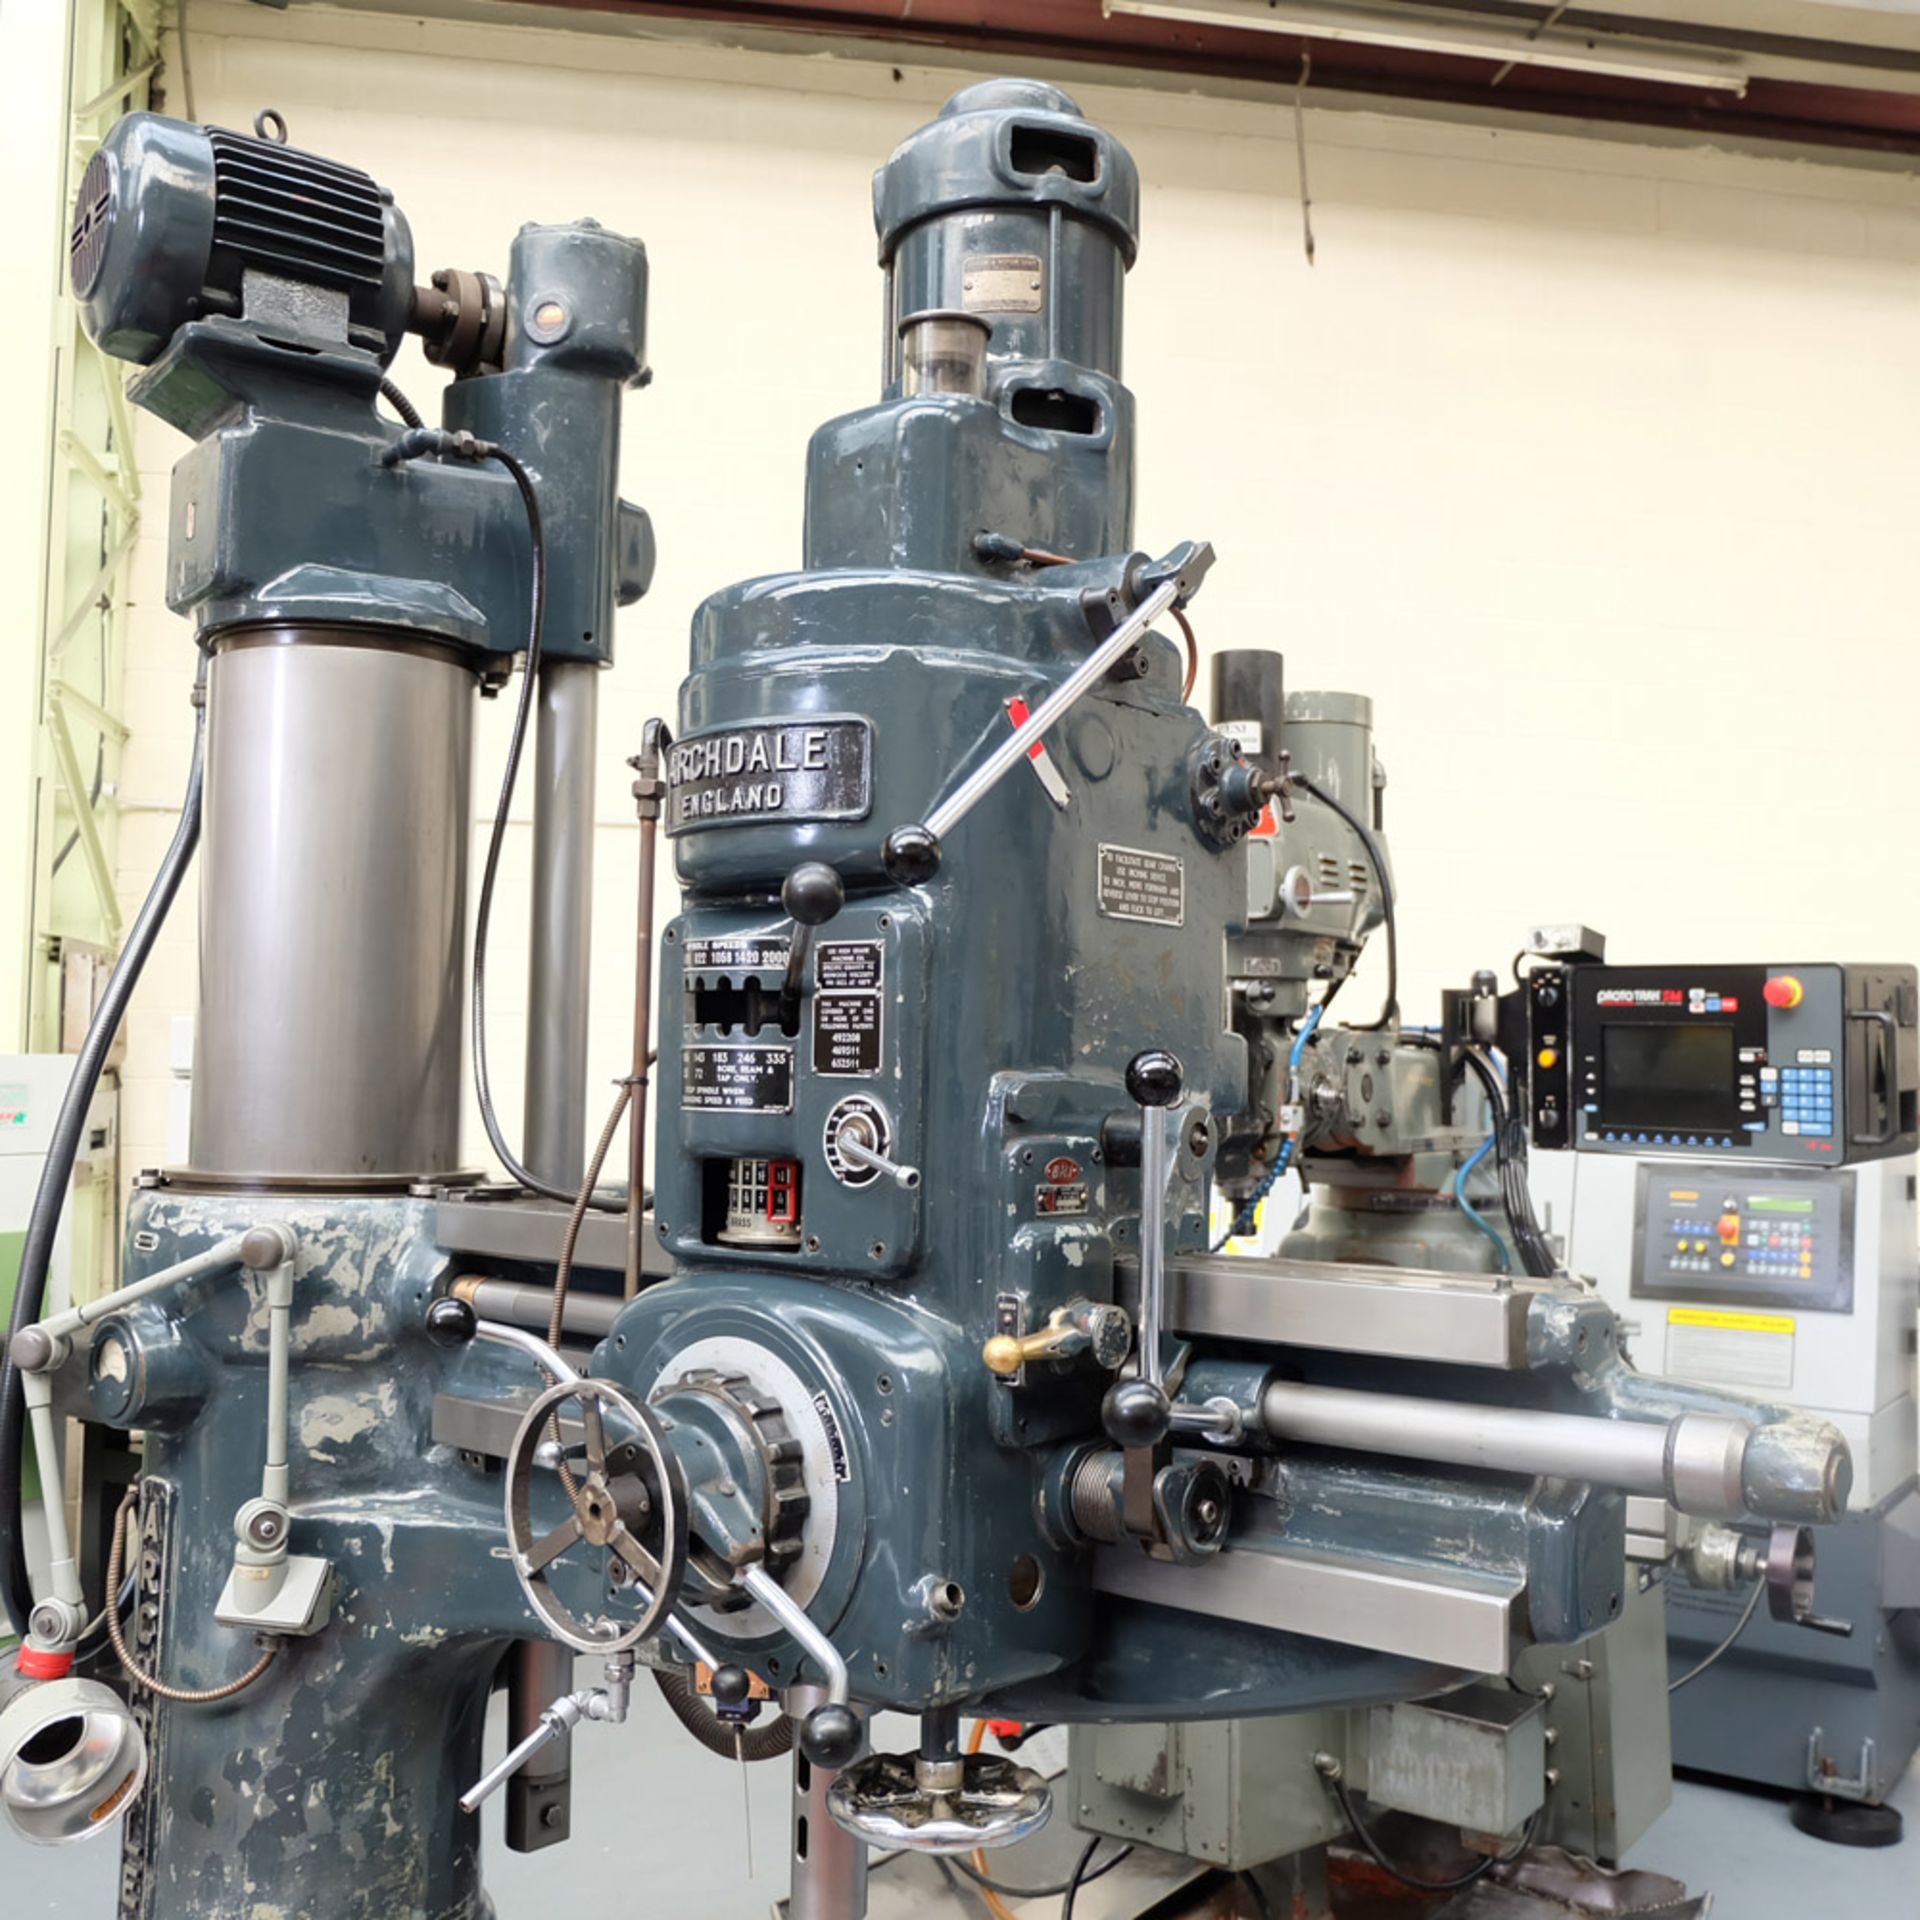 Archdale 3'6" Radial Arm Drill. Radius of Arm 42". Spindle Taper No.4 Morse. - Image 2 of 9